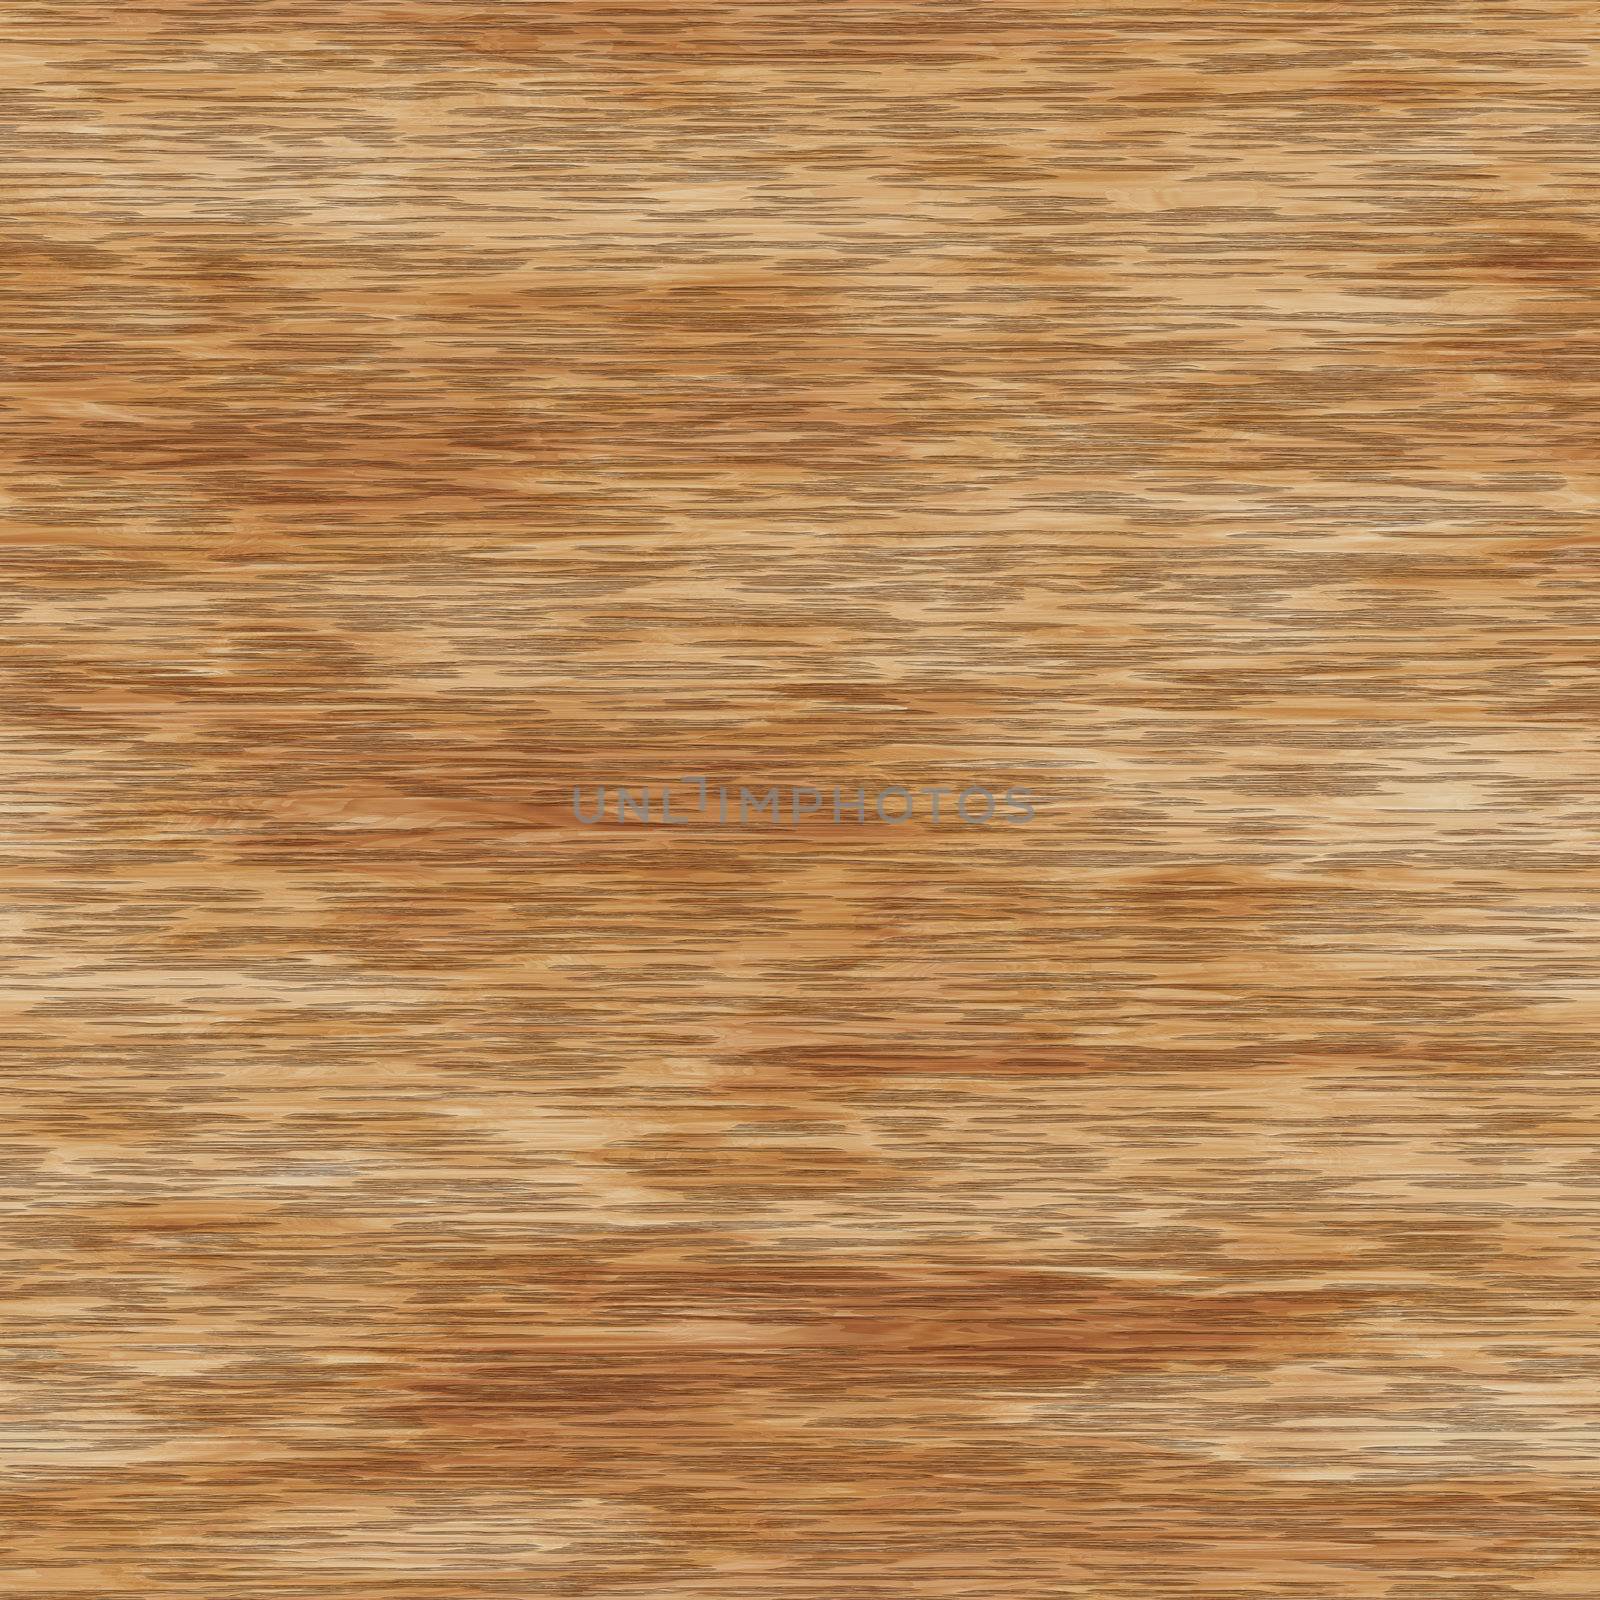 Large seamless grainy wood texture background